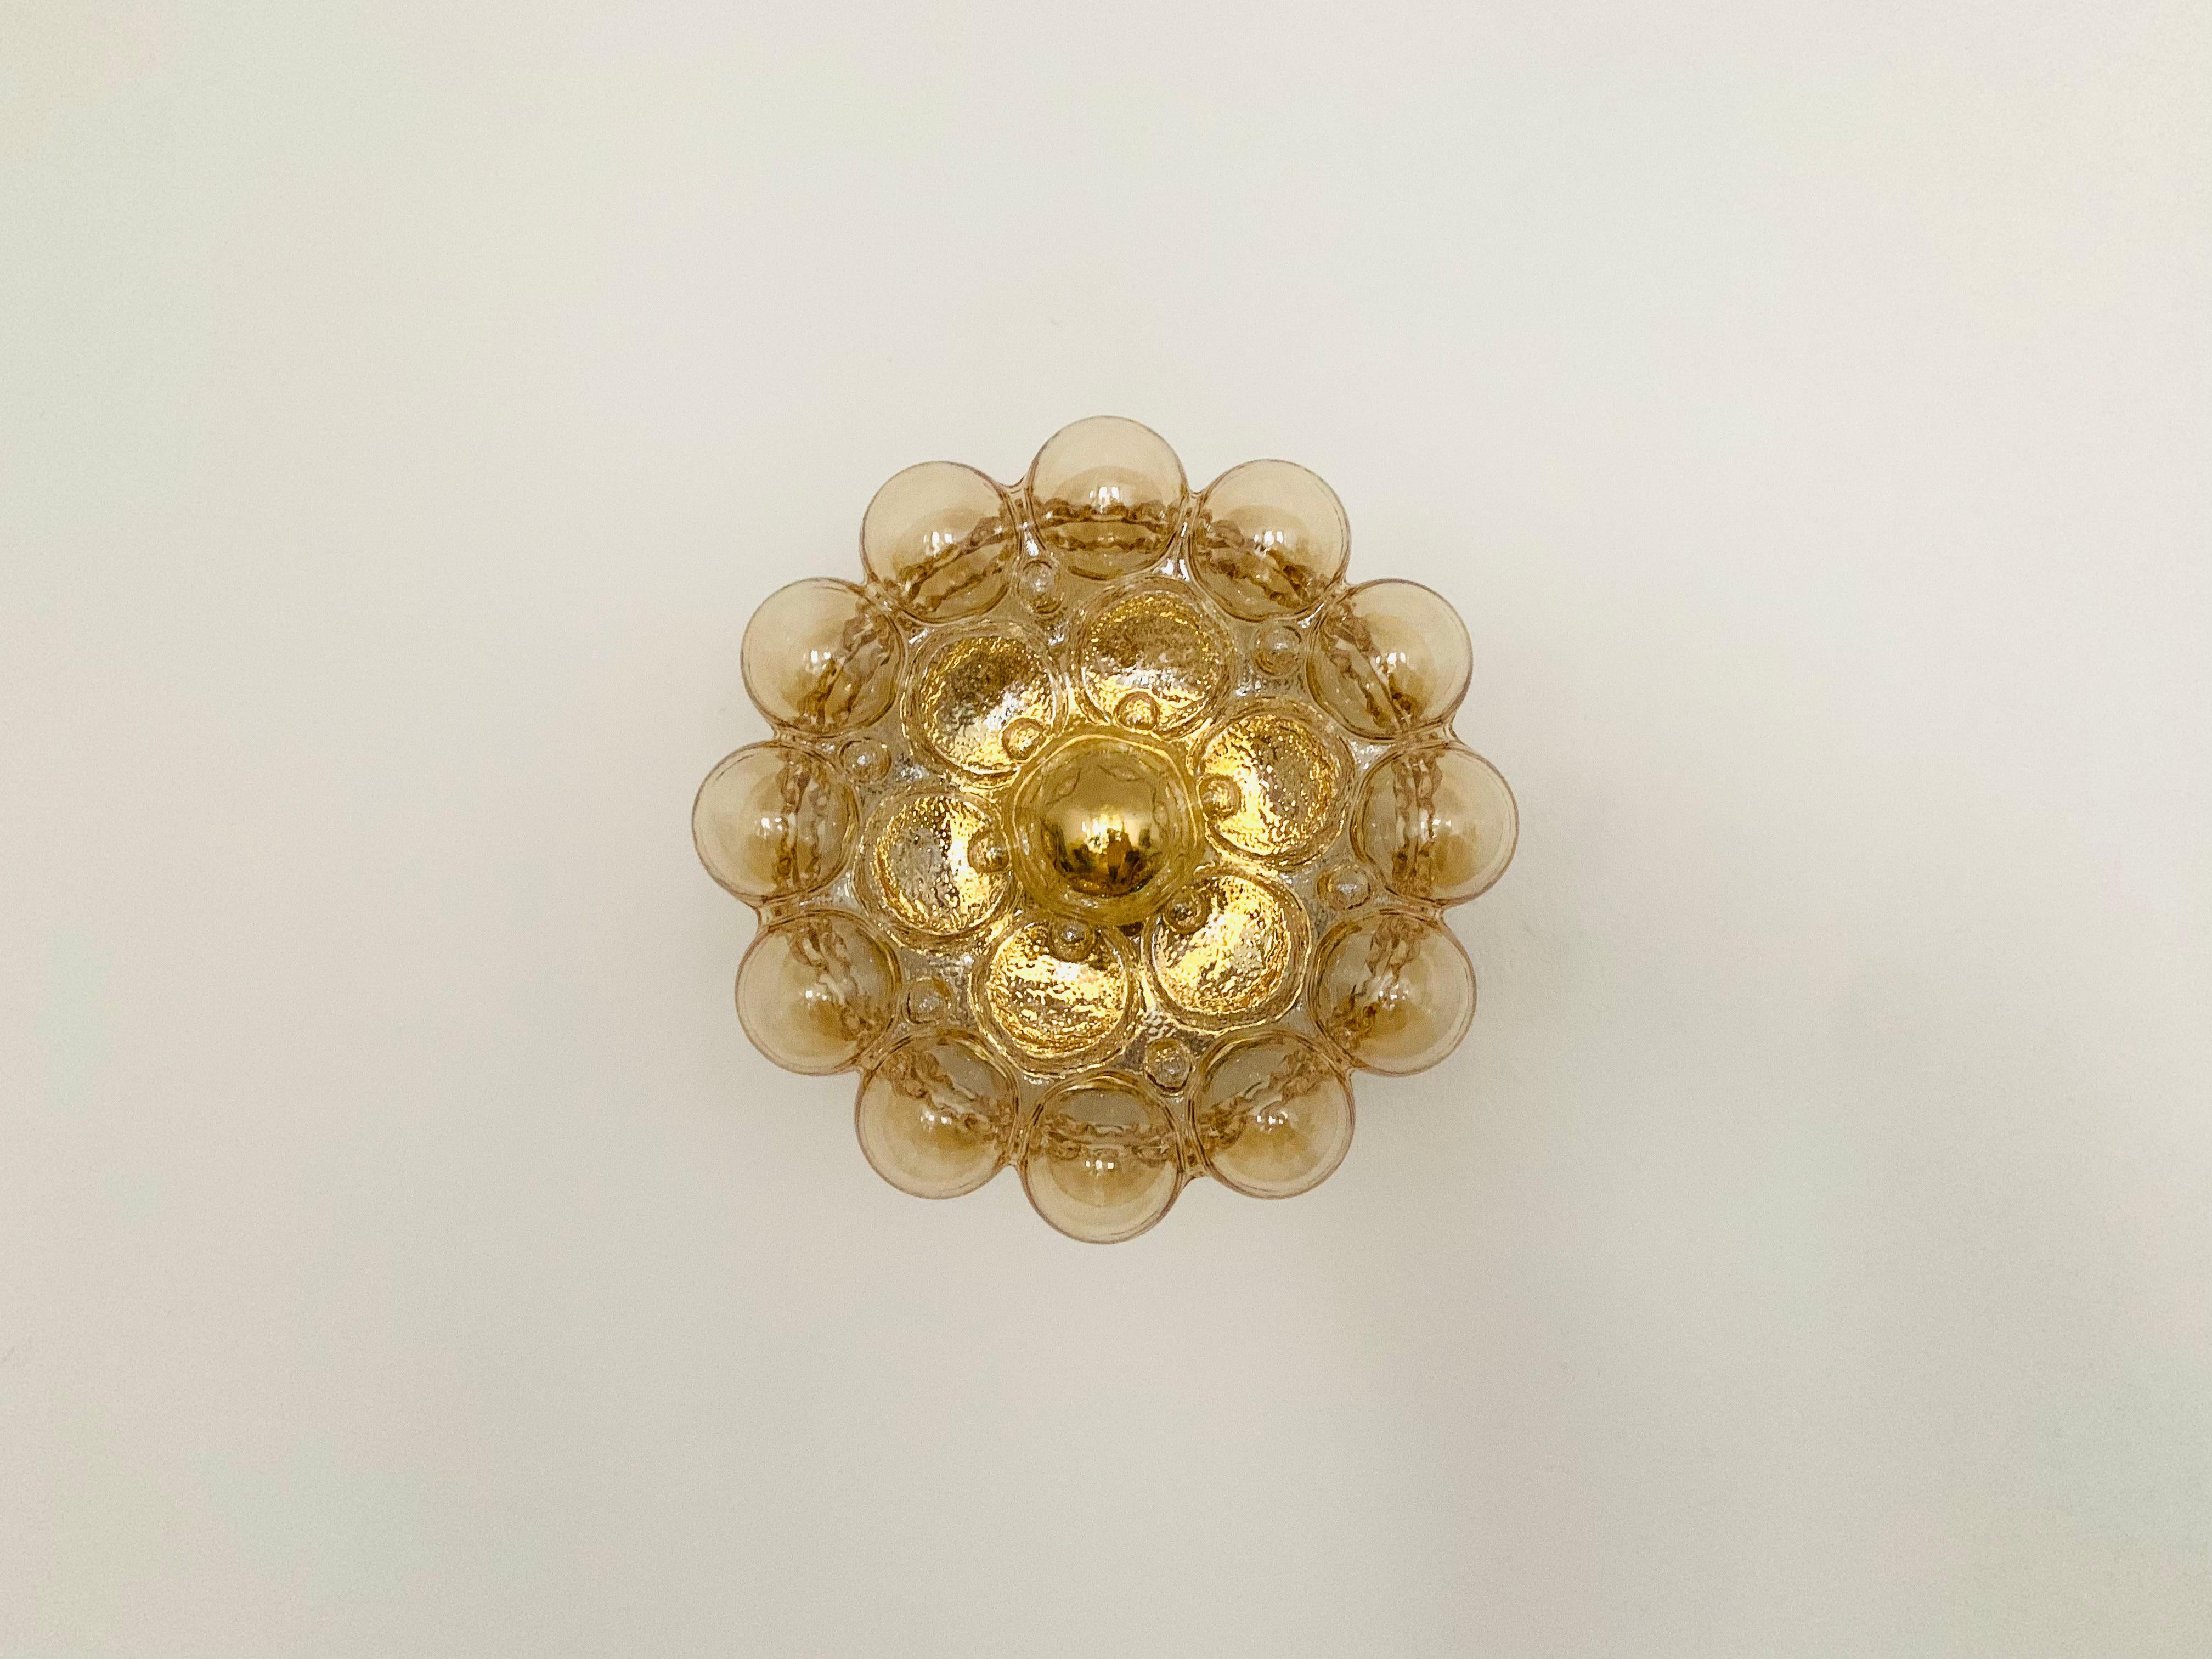 Exceptionally large and beautiful bubble glass wall or ceiling lamp from the 1960s.
Fantastic design and high quality workmanship.
The lamp impresses with its imposing size and the spectacular play of light.

Manufacturer: Glashütte